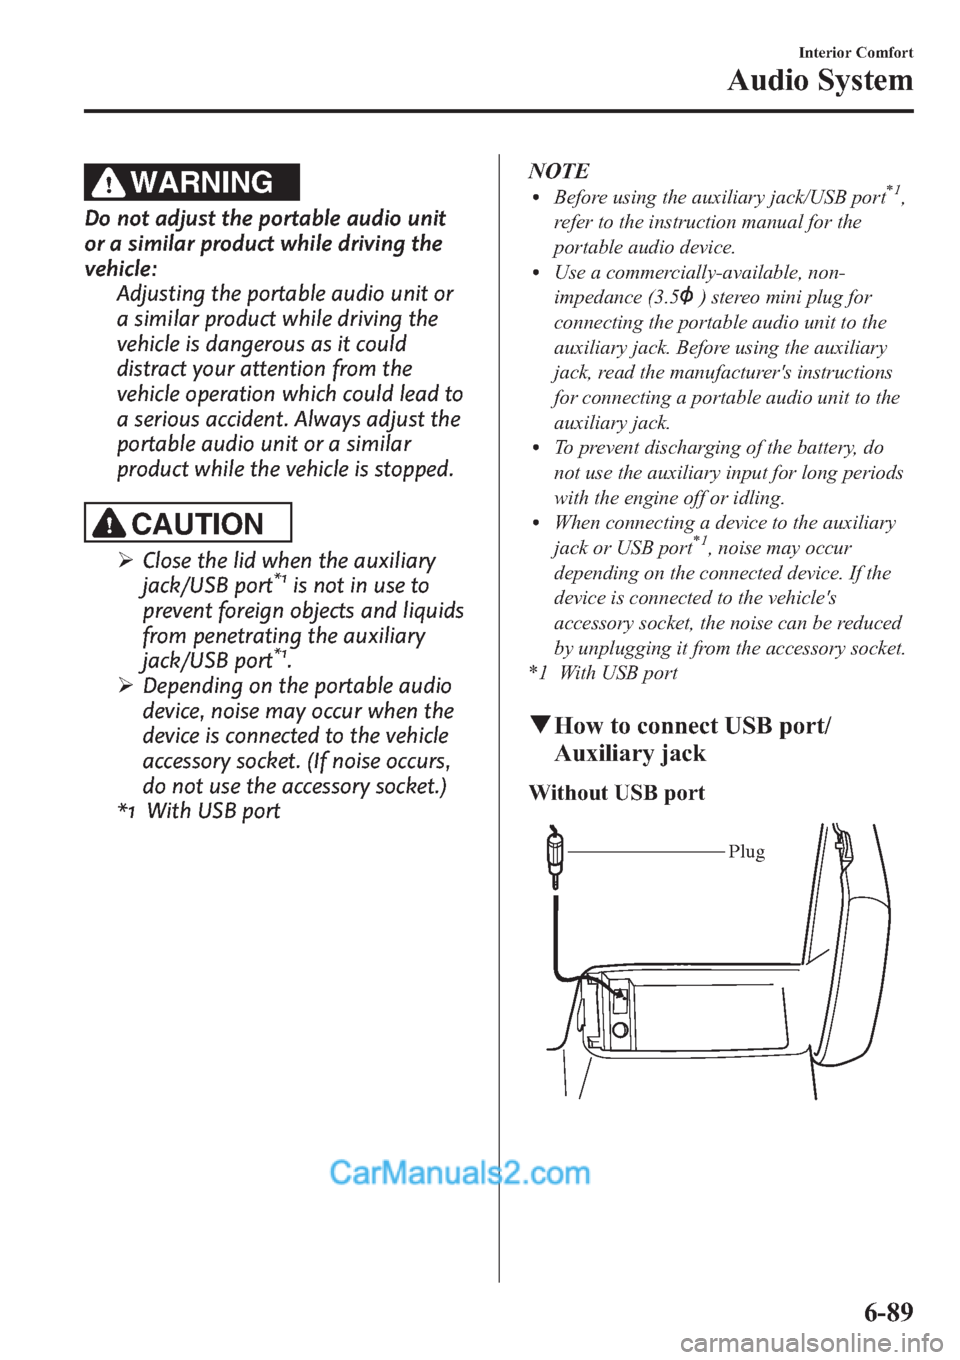 MAZDA MODEL MAZDASPEED 3 2013  Owners Manual (in English) WARNING
Do not adjust the portable audio unit
or a similar product while driving the
vehicle:
Adjusting the portable audio unit or
a similar product while driving the
vehicle is dangerous as it could
